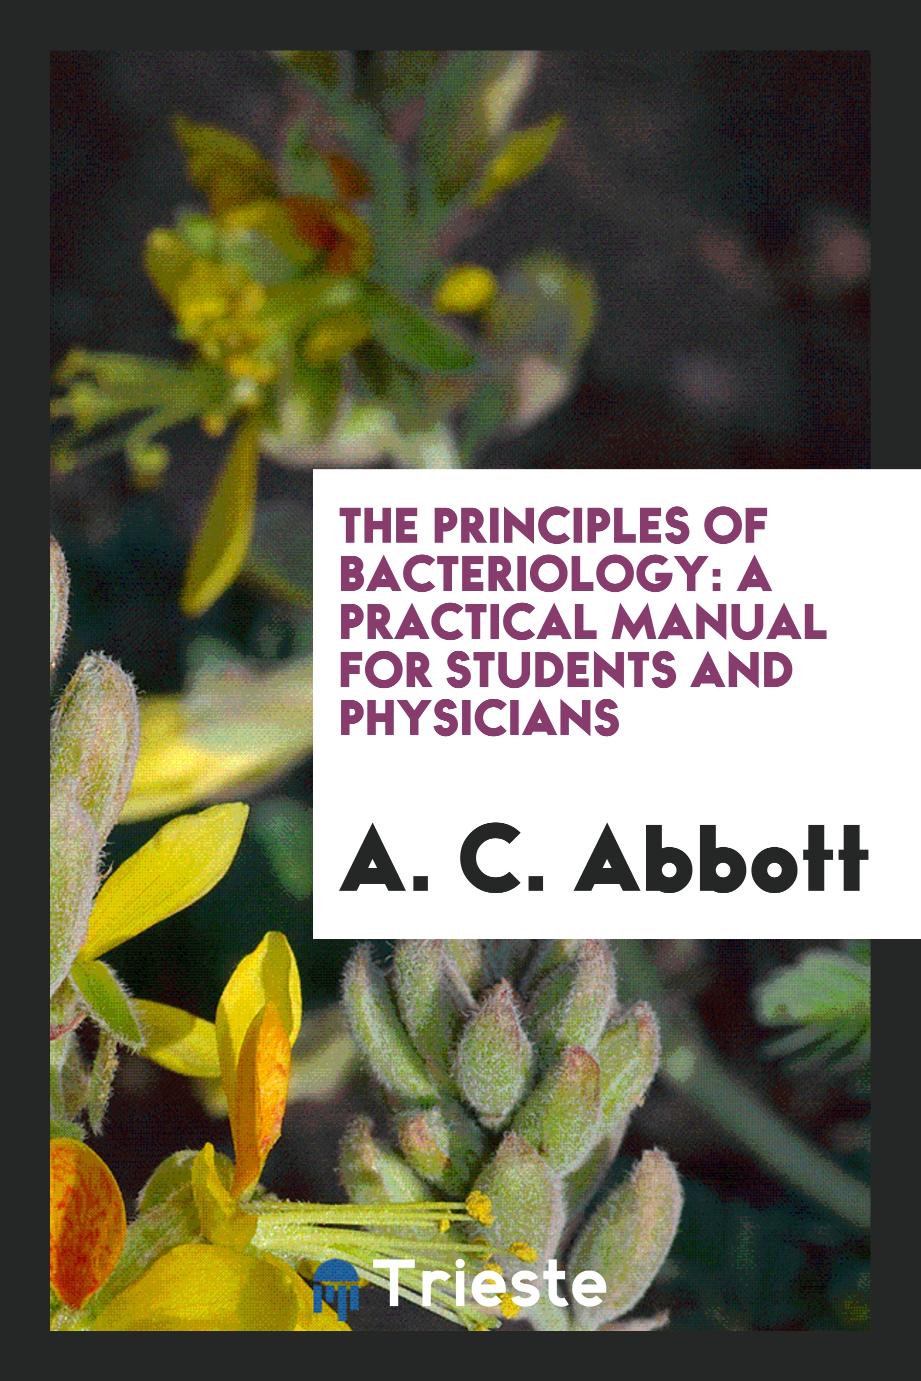 The principles of bacteriology: a practical manual for students and physicians